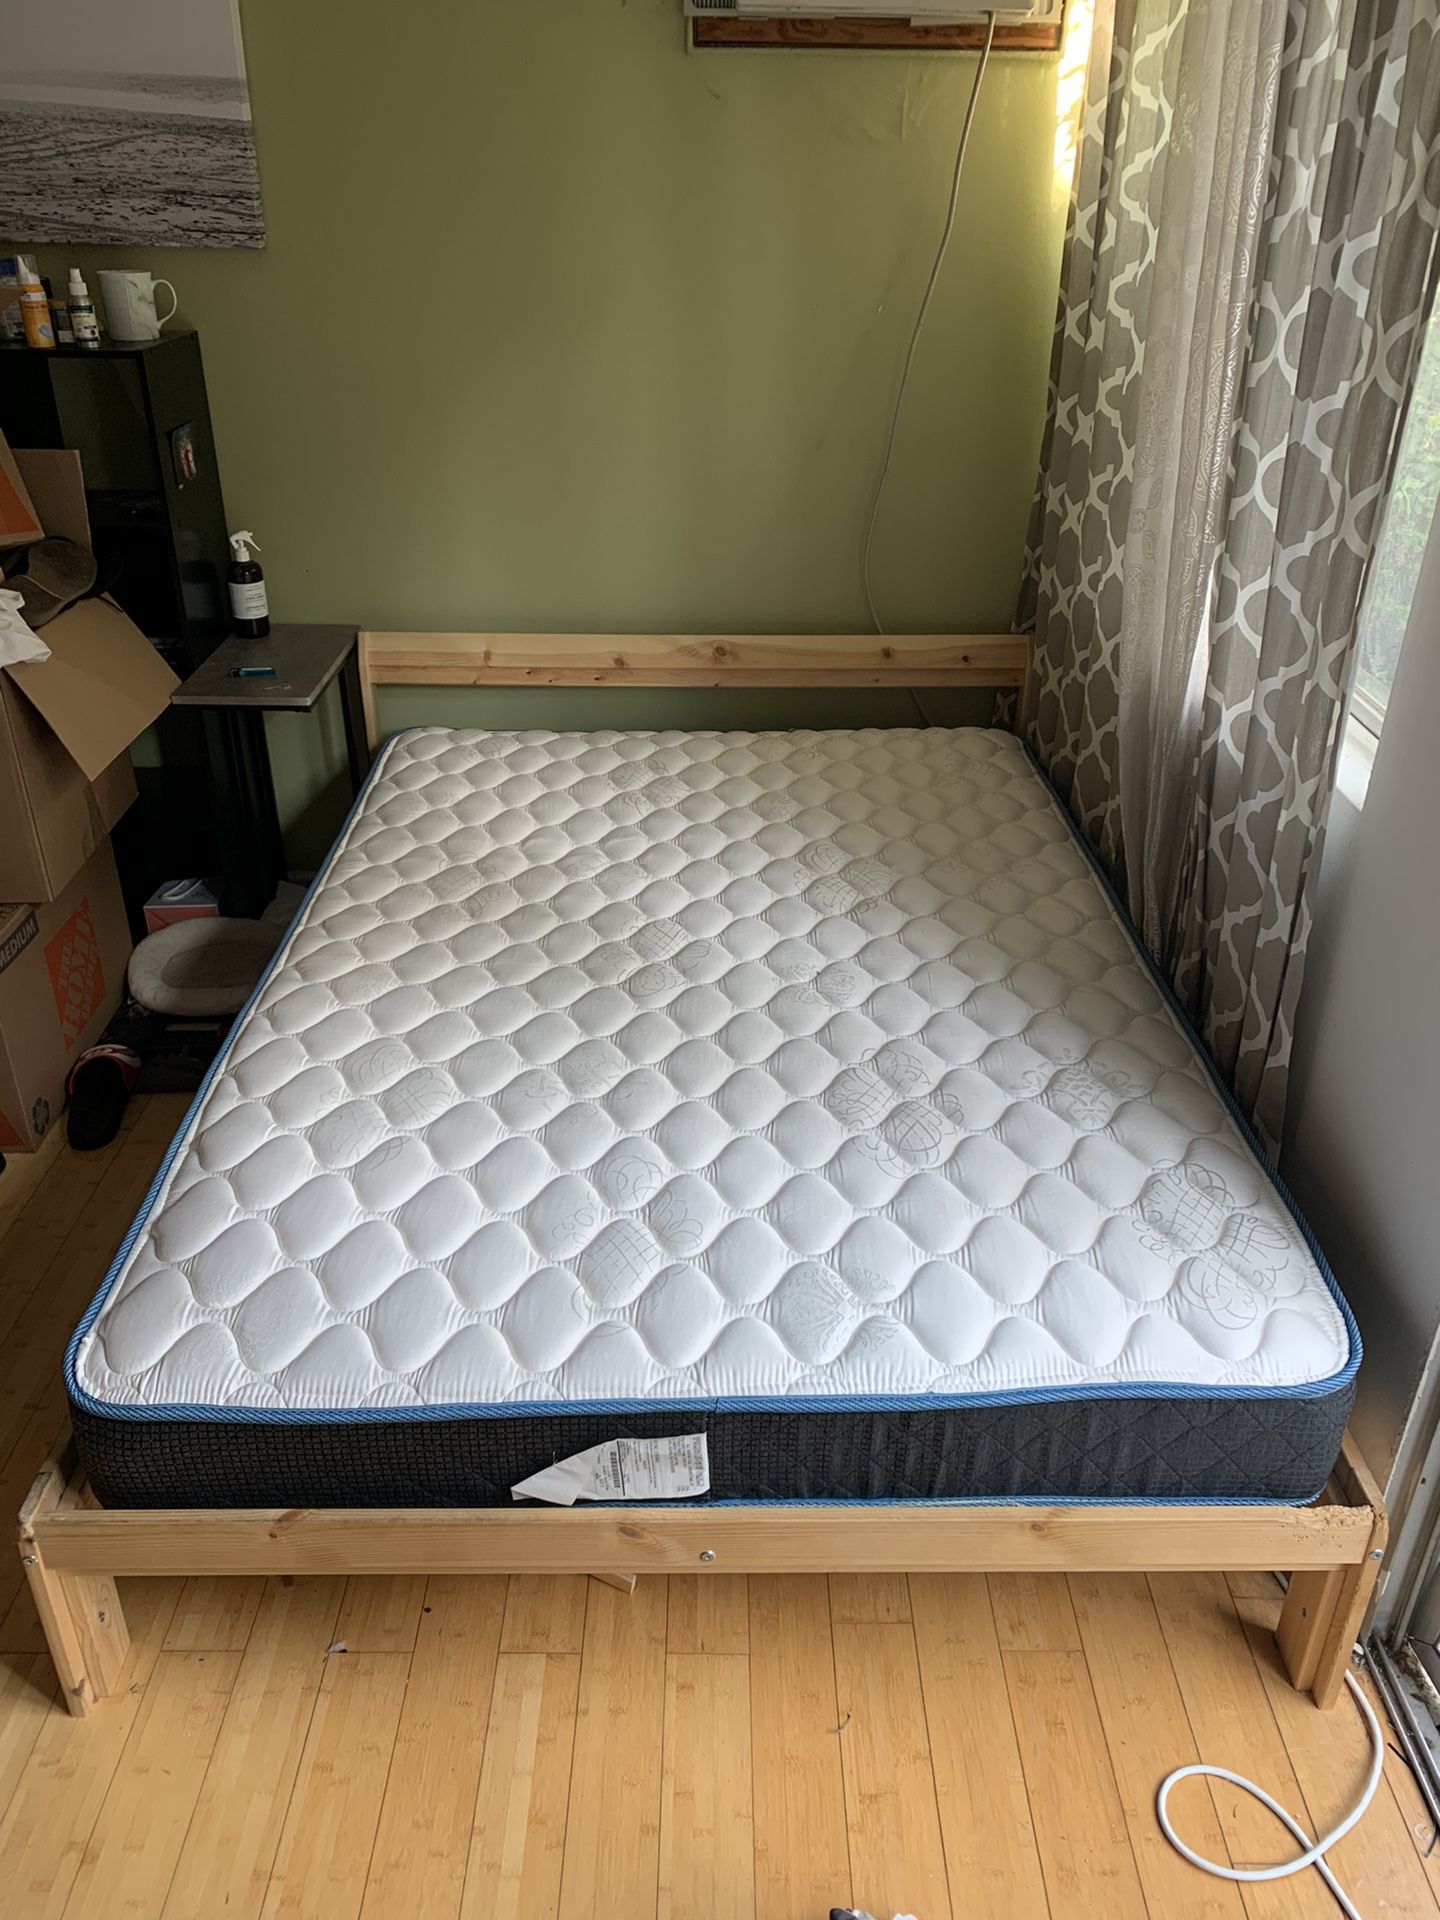 IKEA Bed frame and Like New Mattress